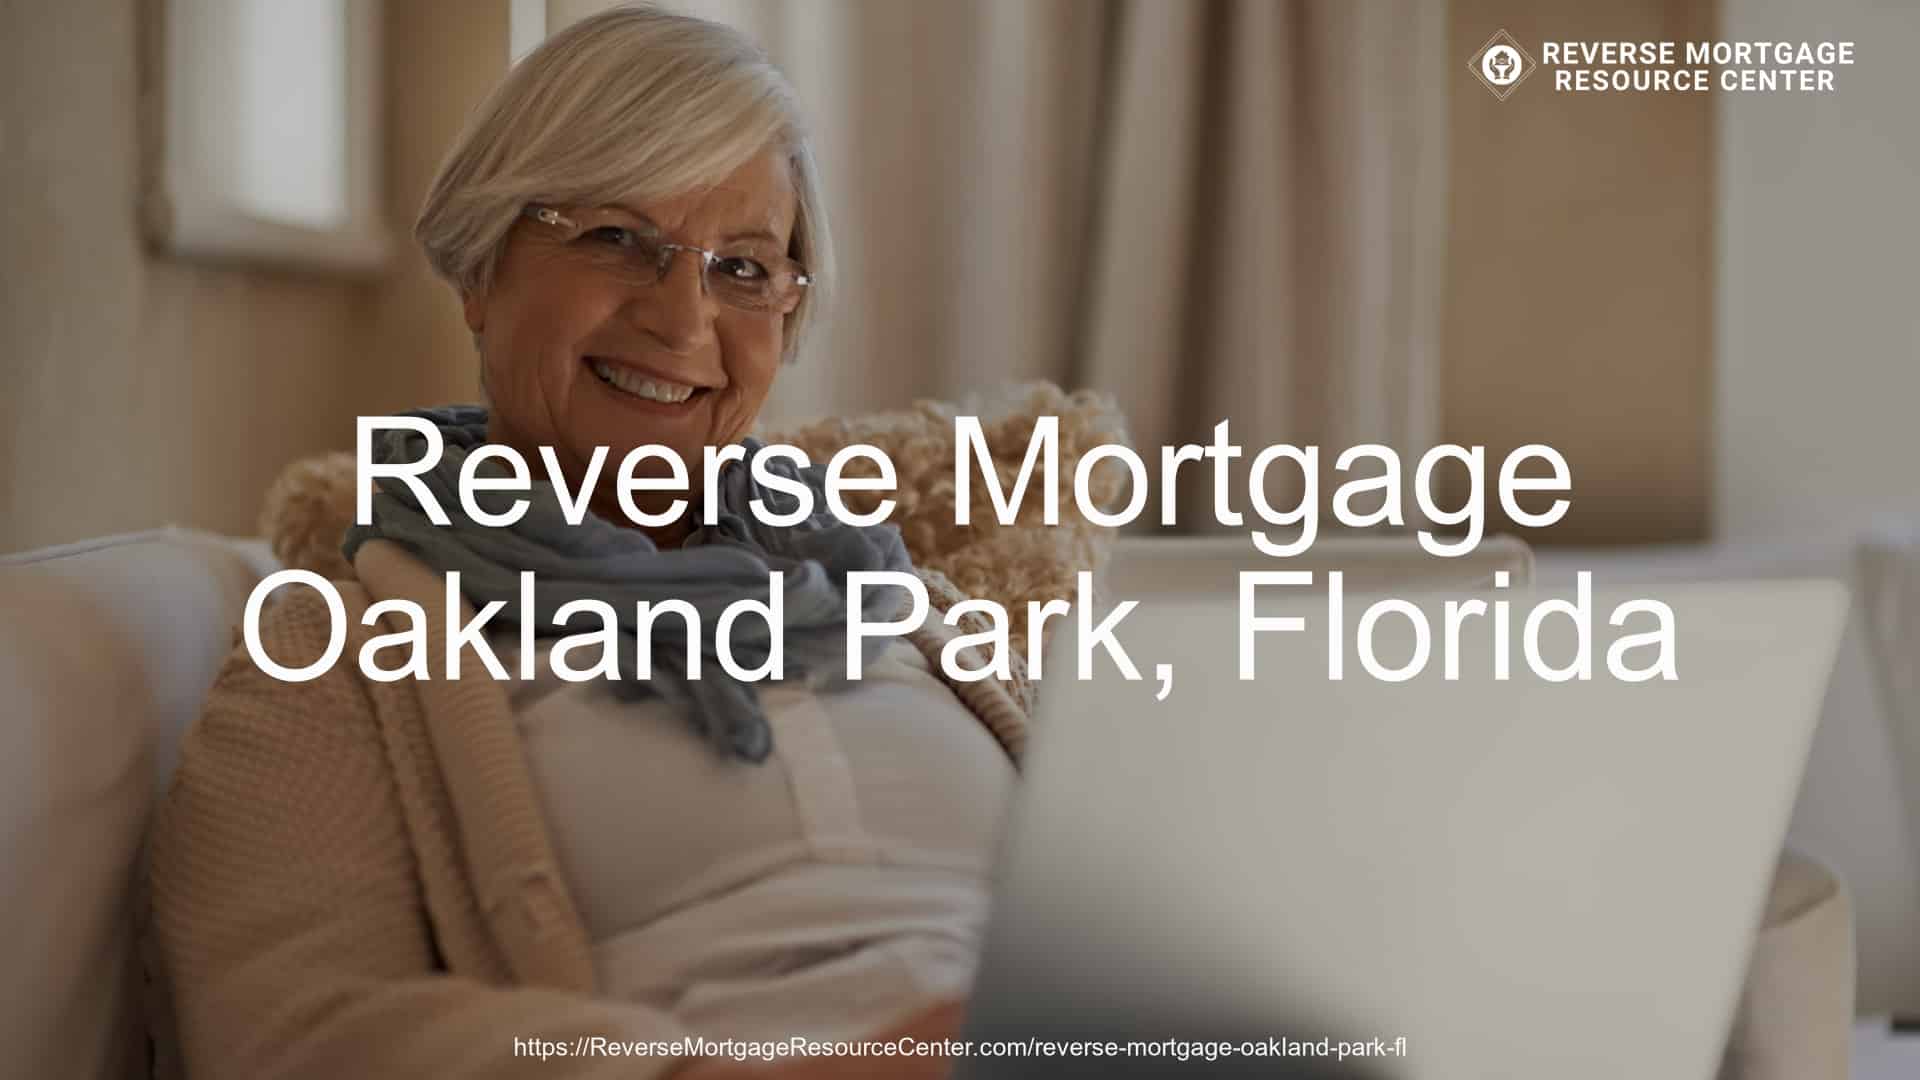 Reverse Mortgage Loans in Oakland Park Florida